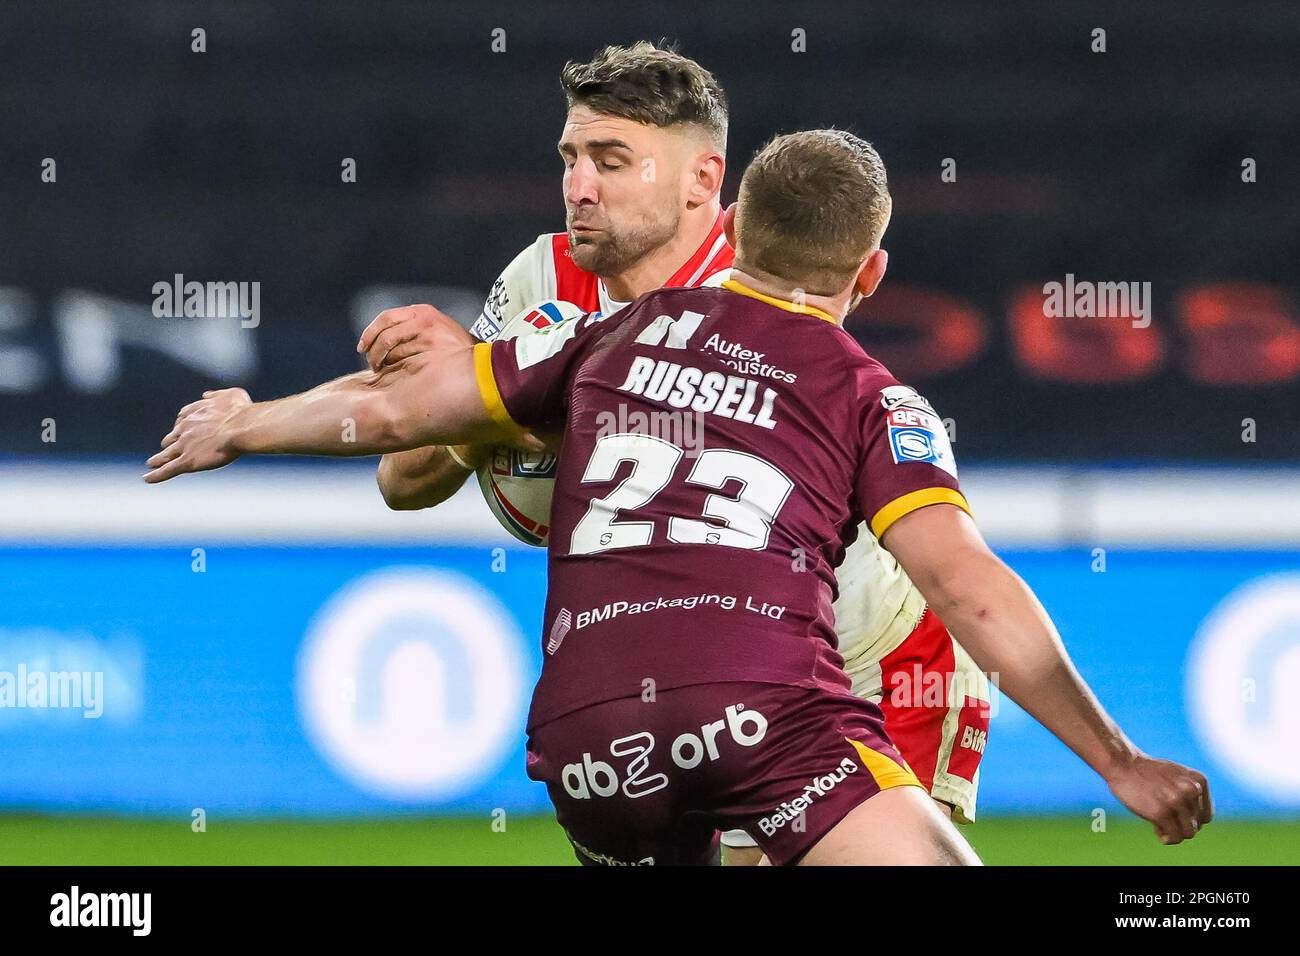 Tommy Makinson #2 of St Helens is tackled by Olly Russell #23 of Huddersfield Giants during the Betfred Super League Round 6 match Huddersfield Giants vs St Helens at John Smith's Stadium, Huddersfield, United Kingdom, 23rd March 2023  (Photo by Craig Thomas/News Images) Stock Photo